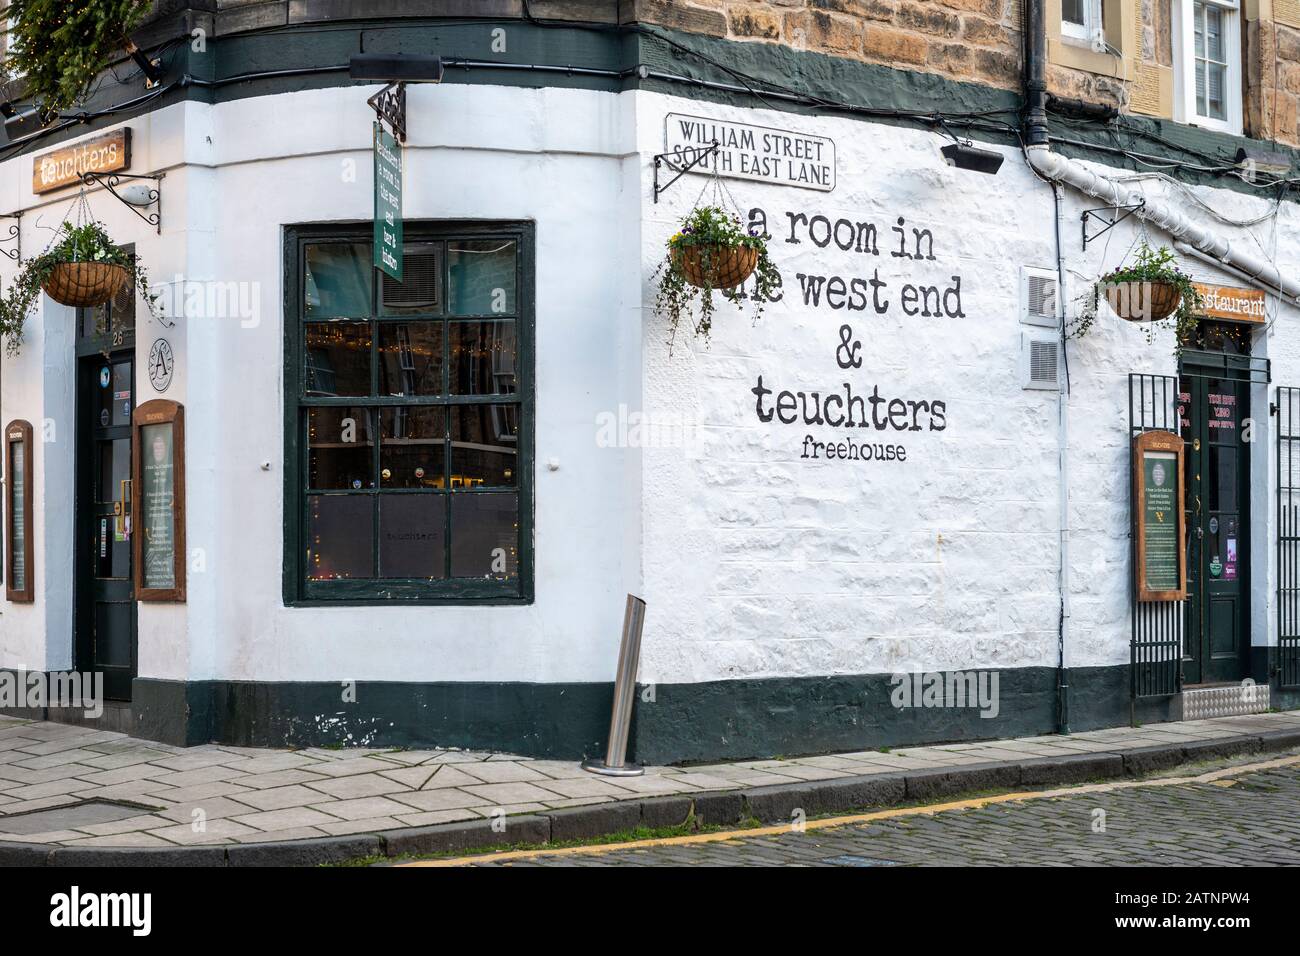 Teuchters Pub with A Room in the West End basement restaurant on William Street in the West End of Edinburgh, Scotland, United Kingdom Stock Photo